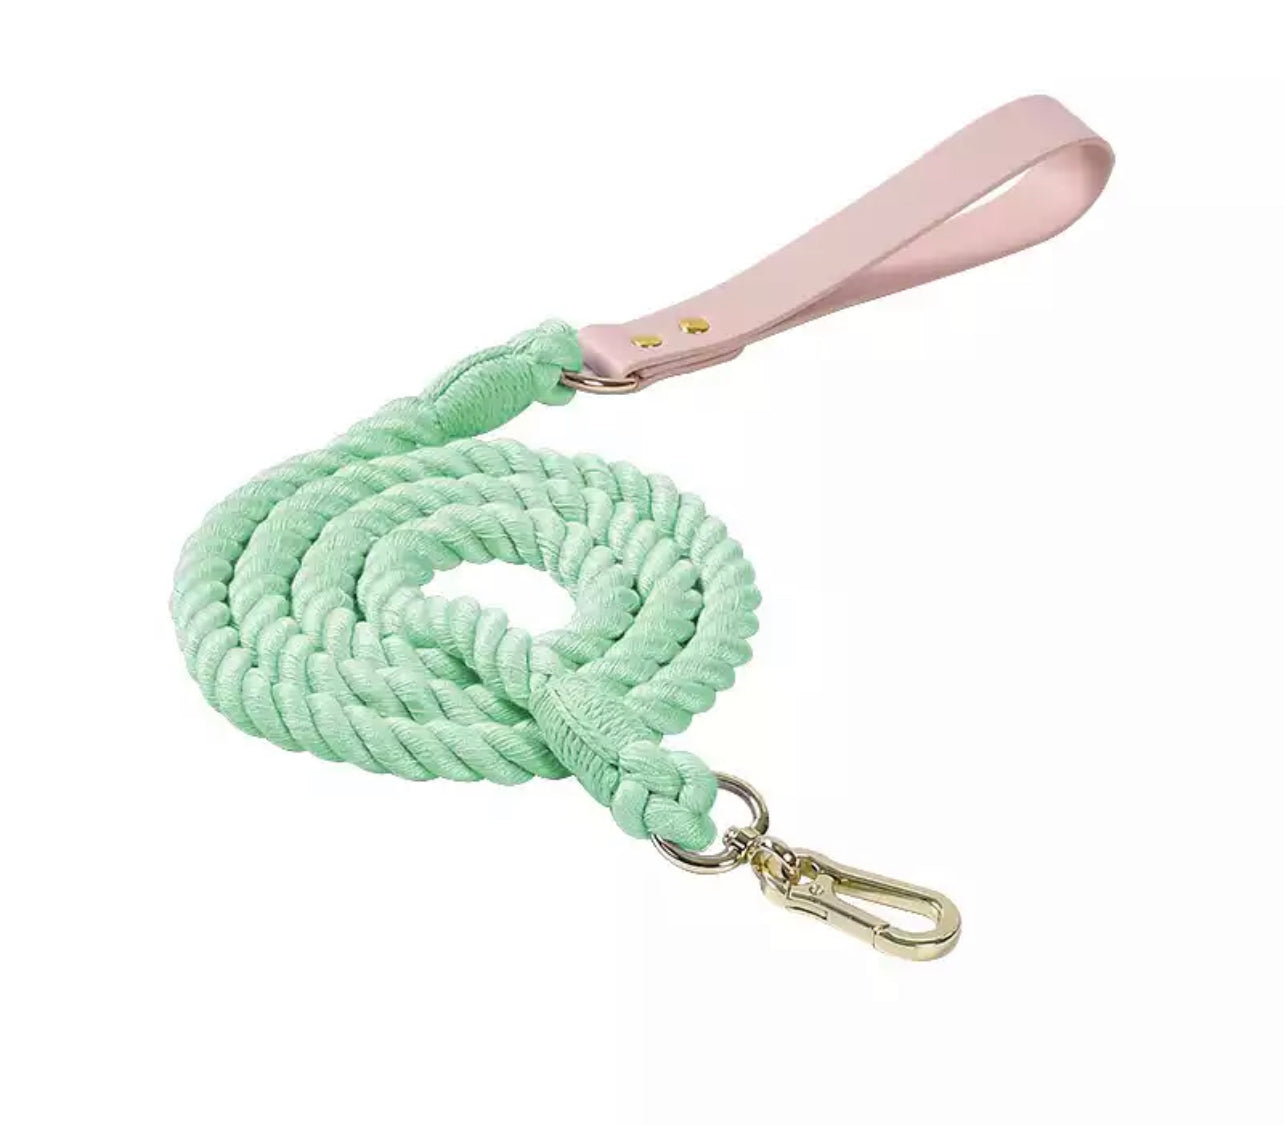 Pink/Tiffany Green Rope Collar and Lead Set